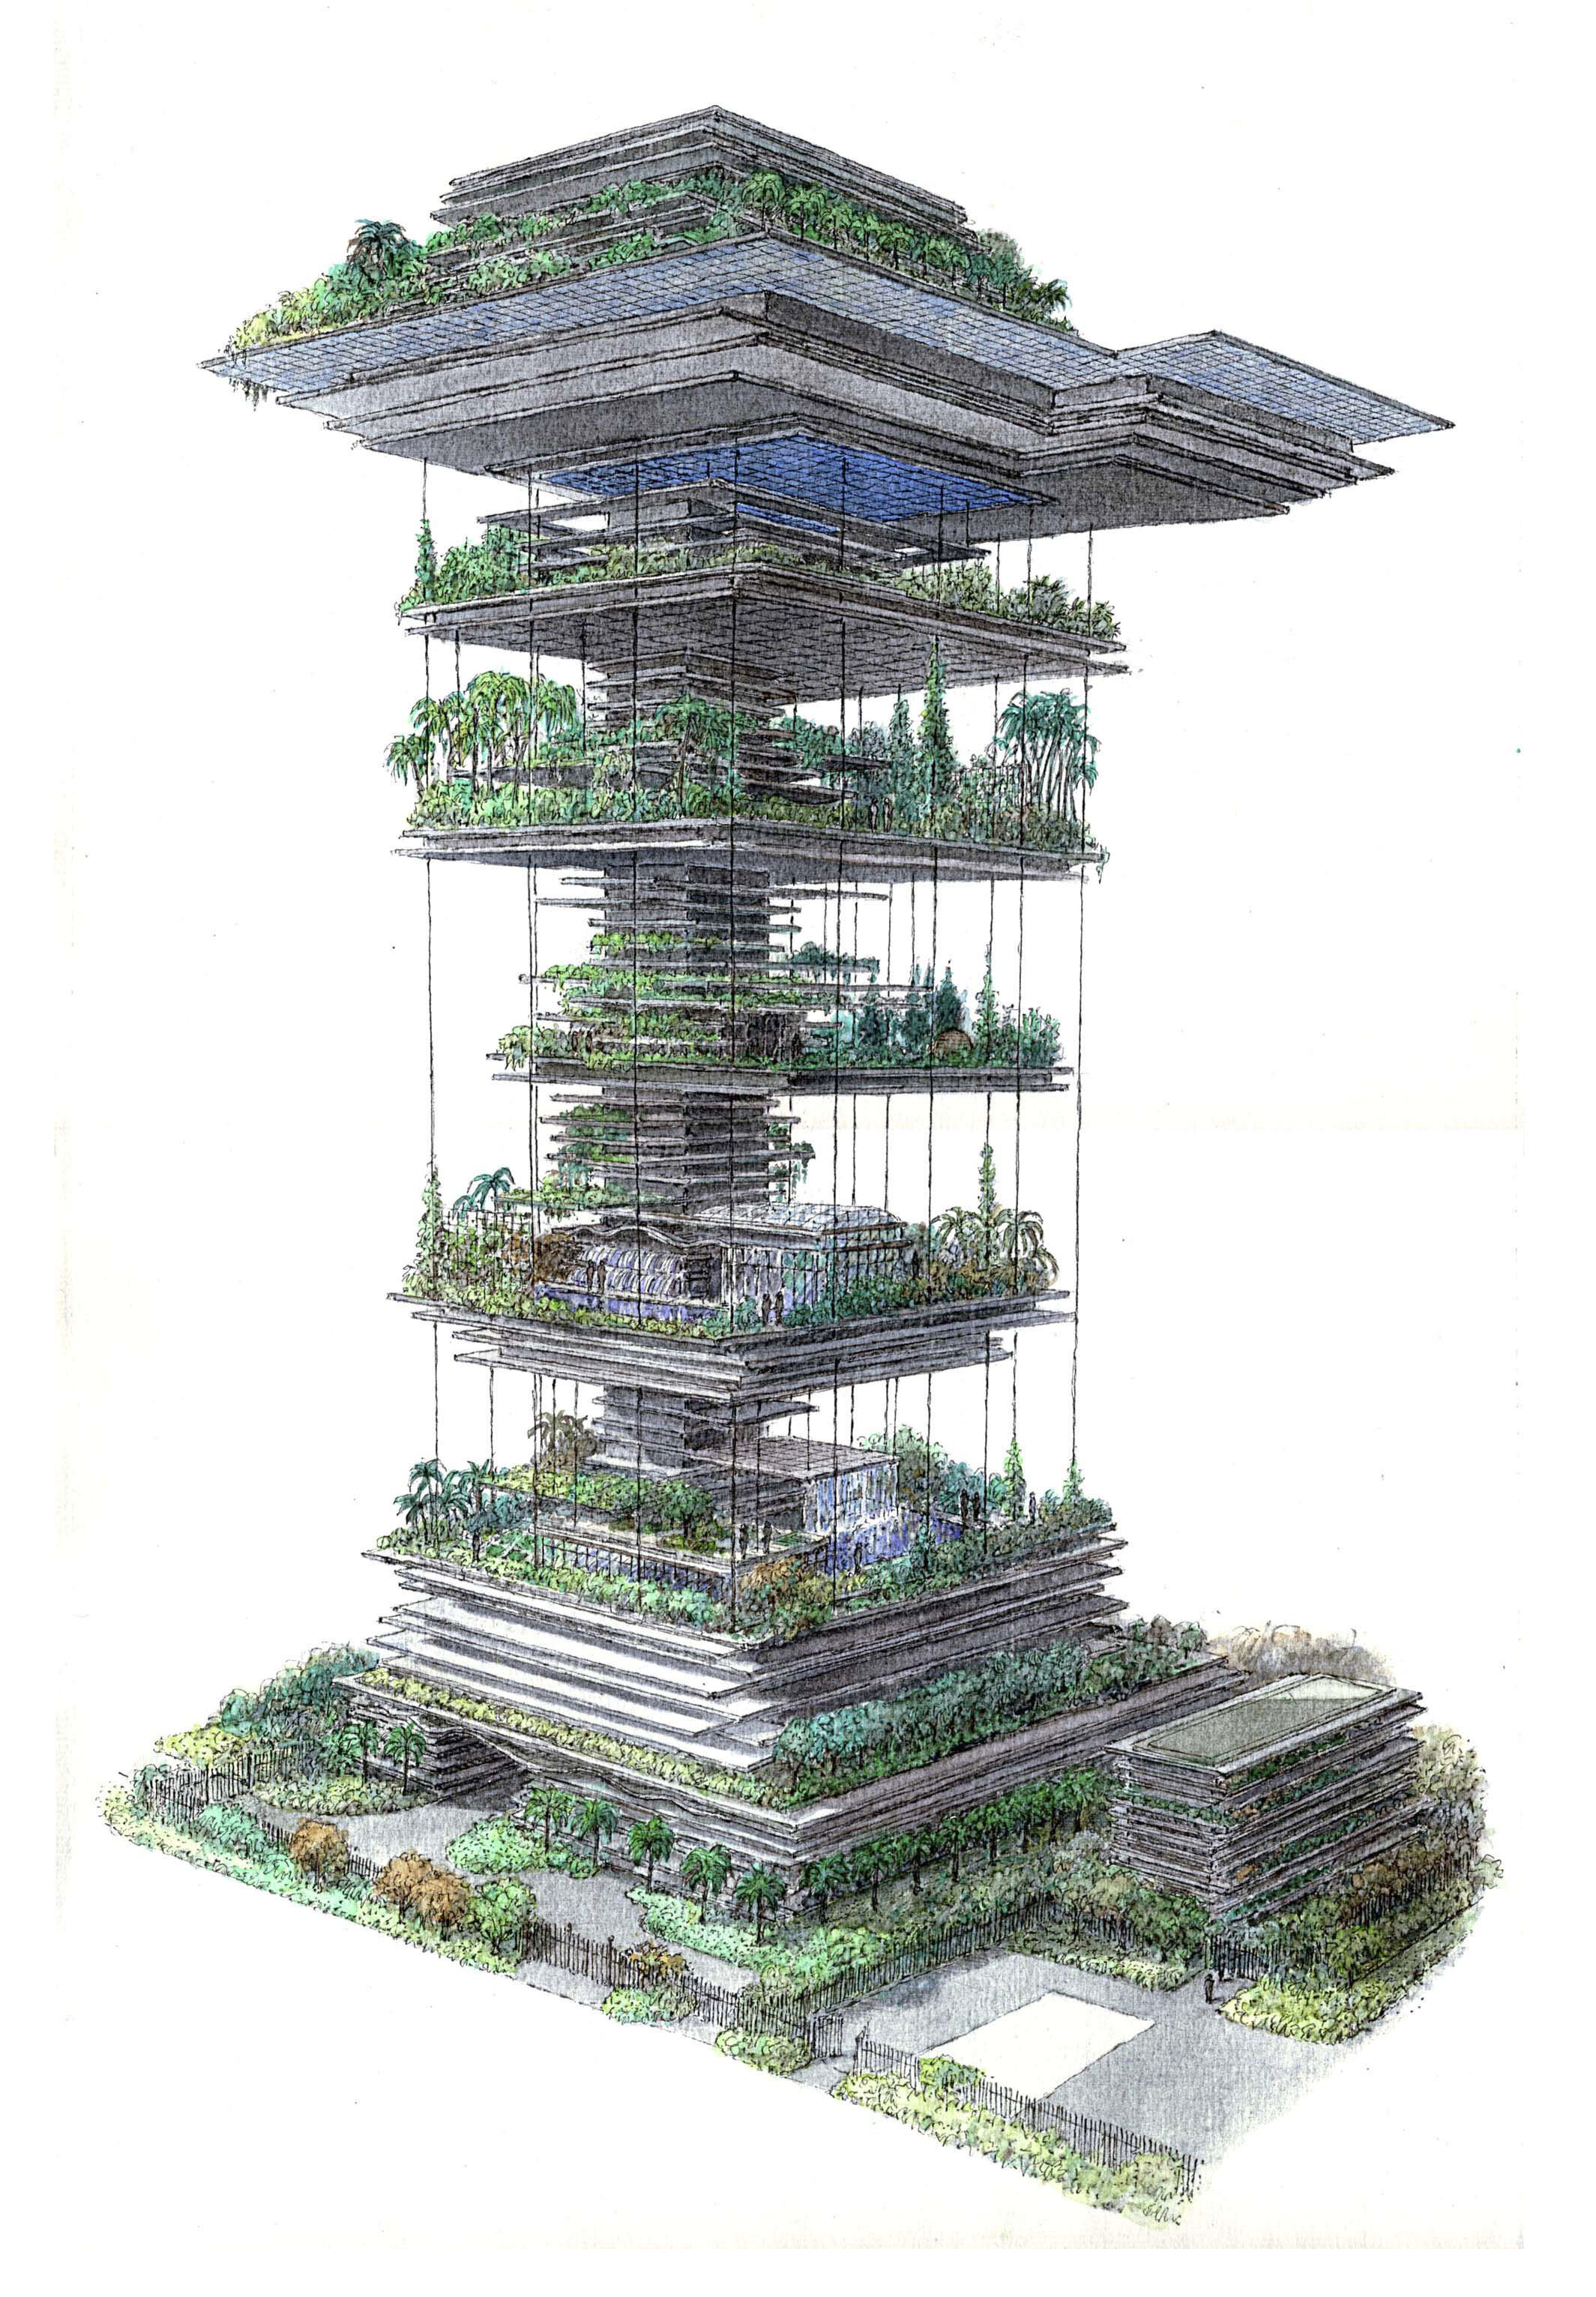 Antilia ‘Vertiscape” Tower – Mumbai, India – 2003Tower drawing by J. Wines showing the multi-layered Hindu gardens and cable support system.